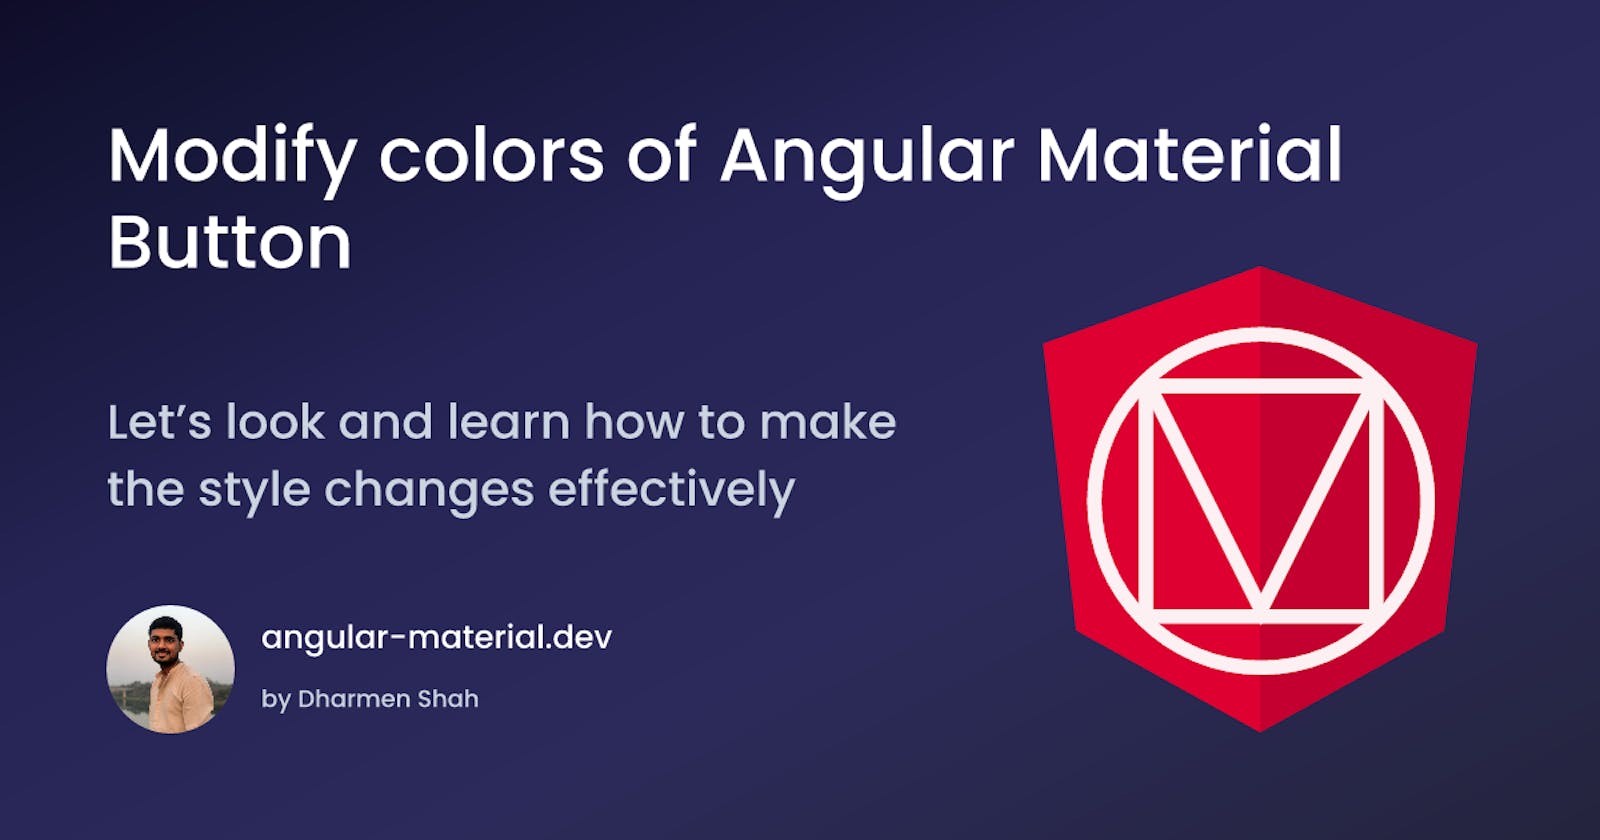 Modify colors of Angular Material Button